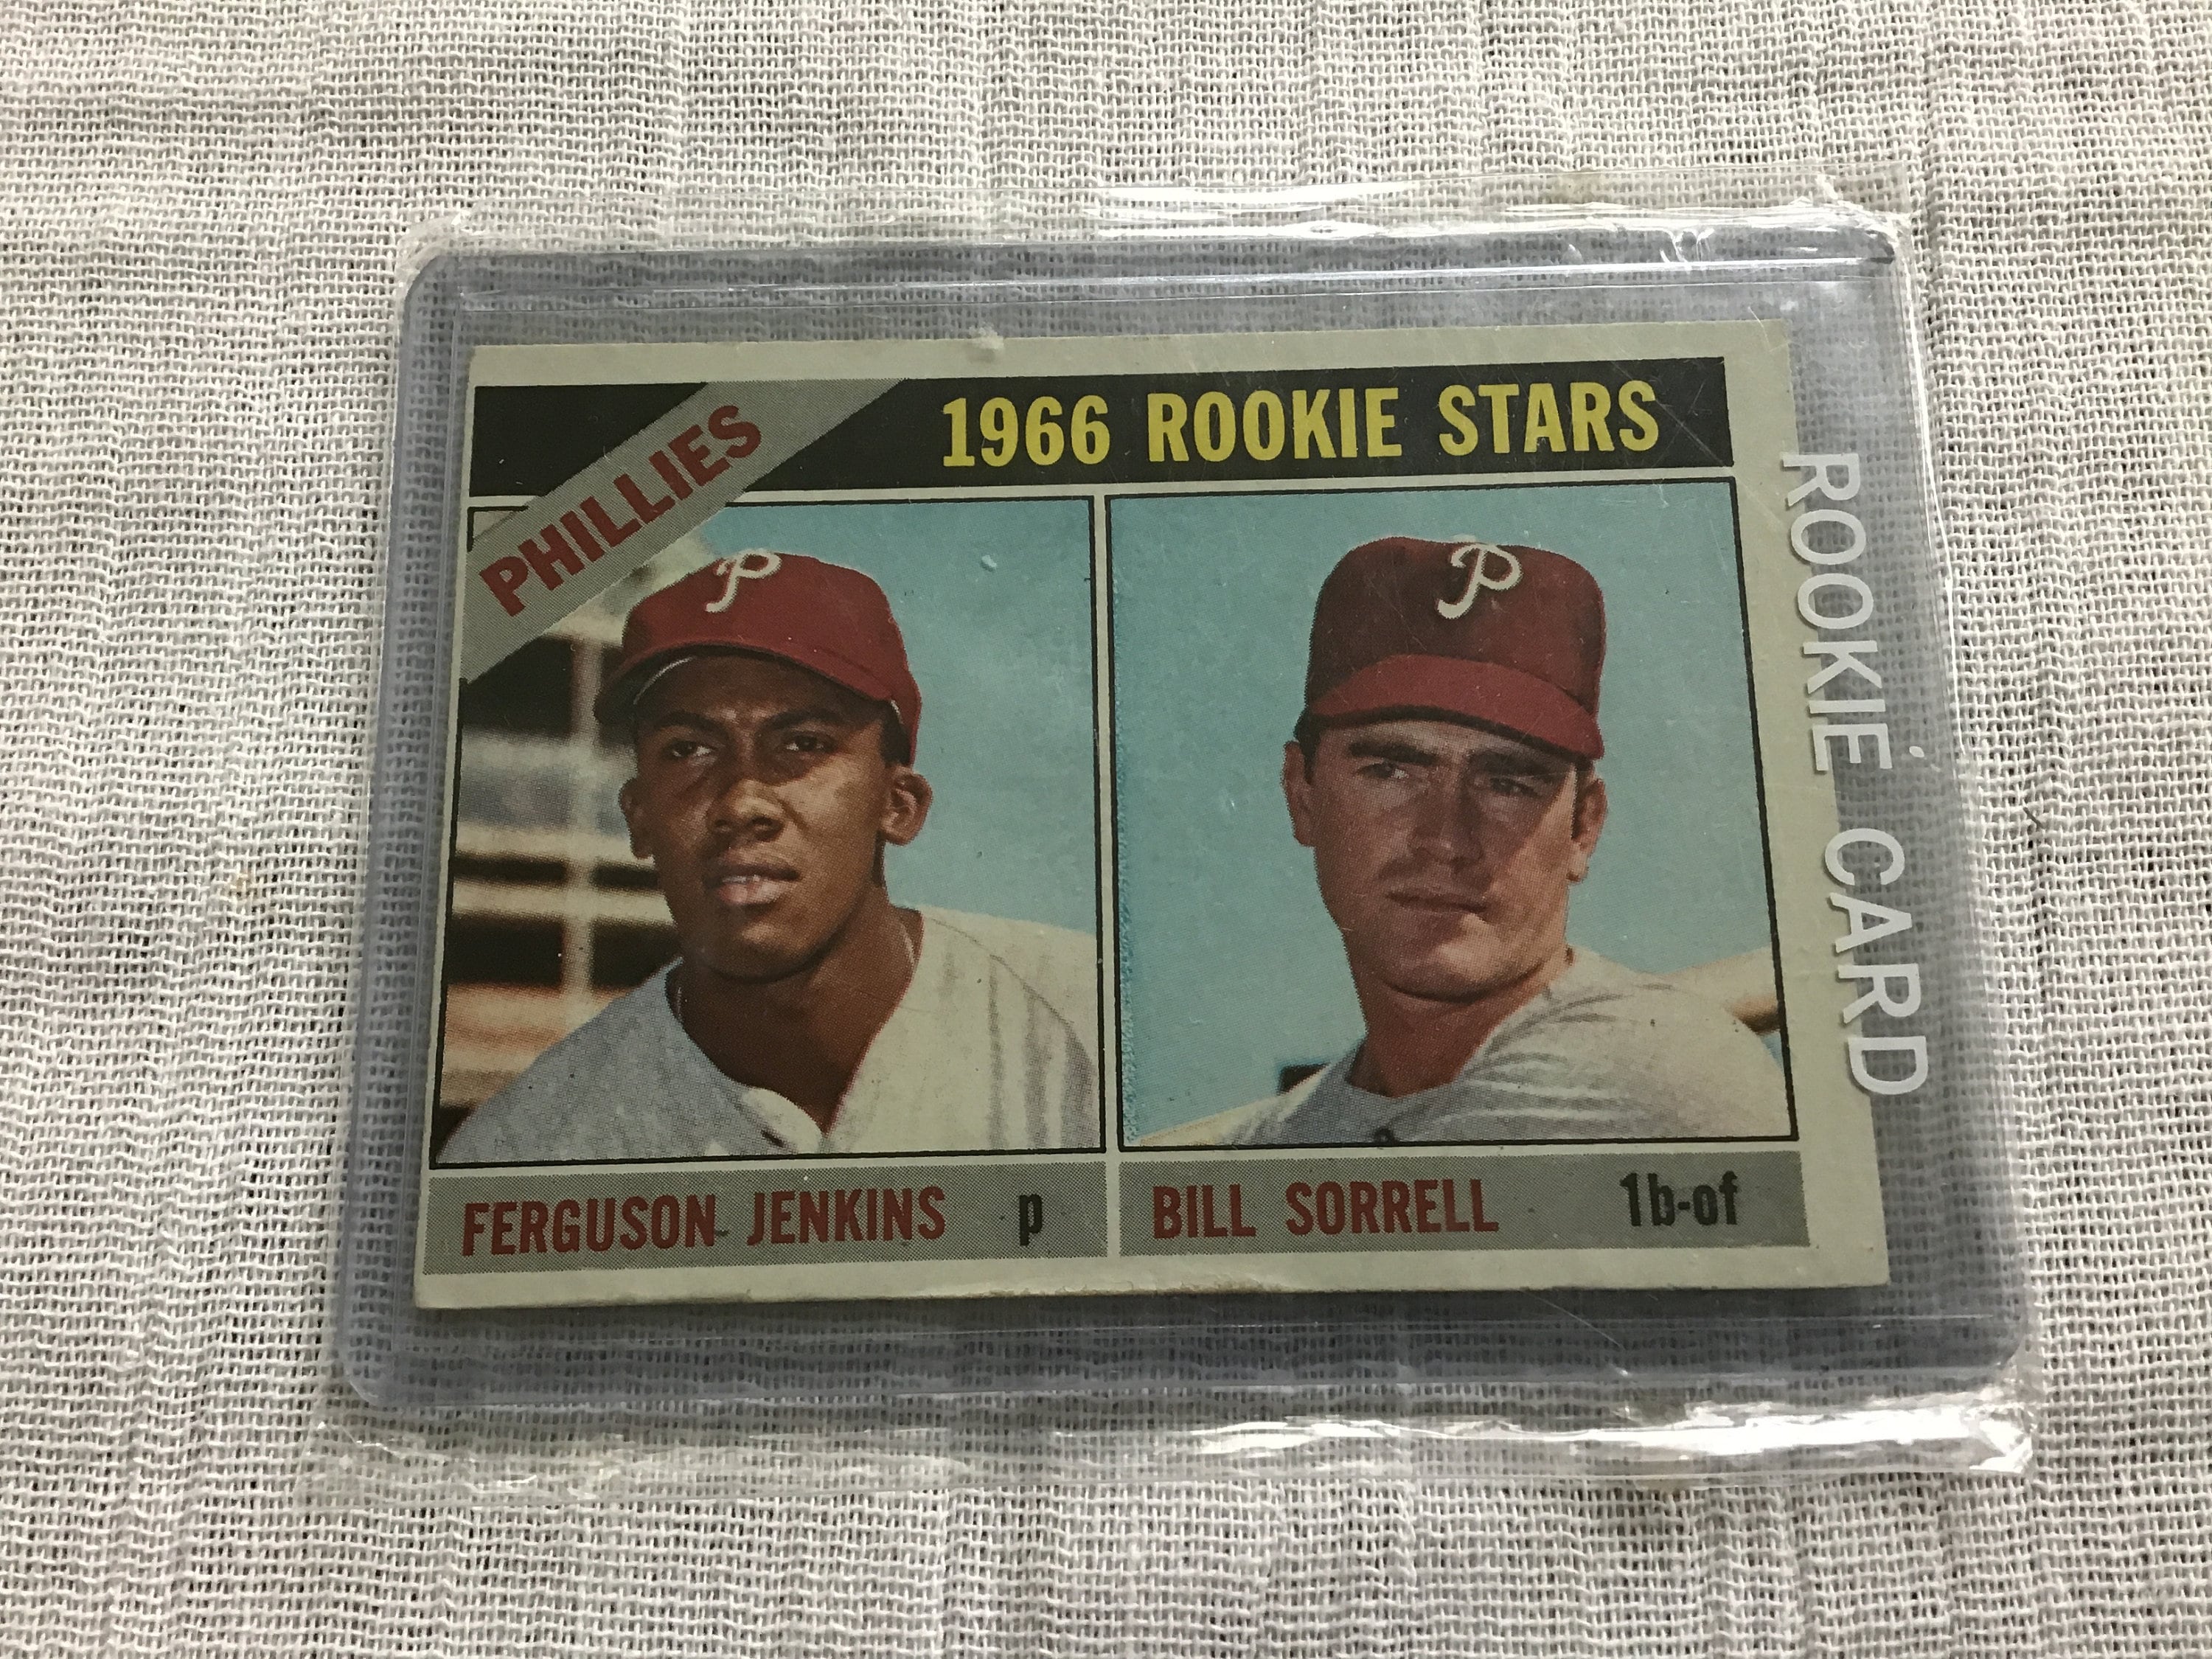 1966 Topps - Phillies Rookie Stars - Ferguson Jenkins-Pitcher & Bill  Sorrell-1B-OF Baseball Card No 254 - Stored in Protective Sleeve